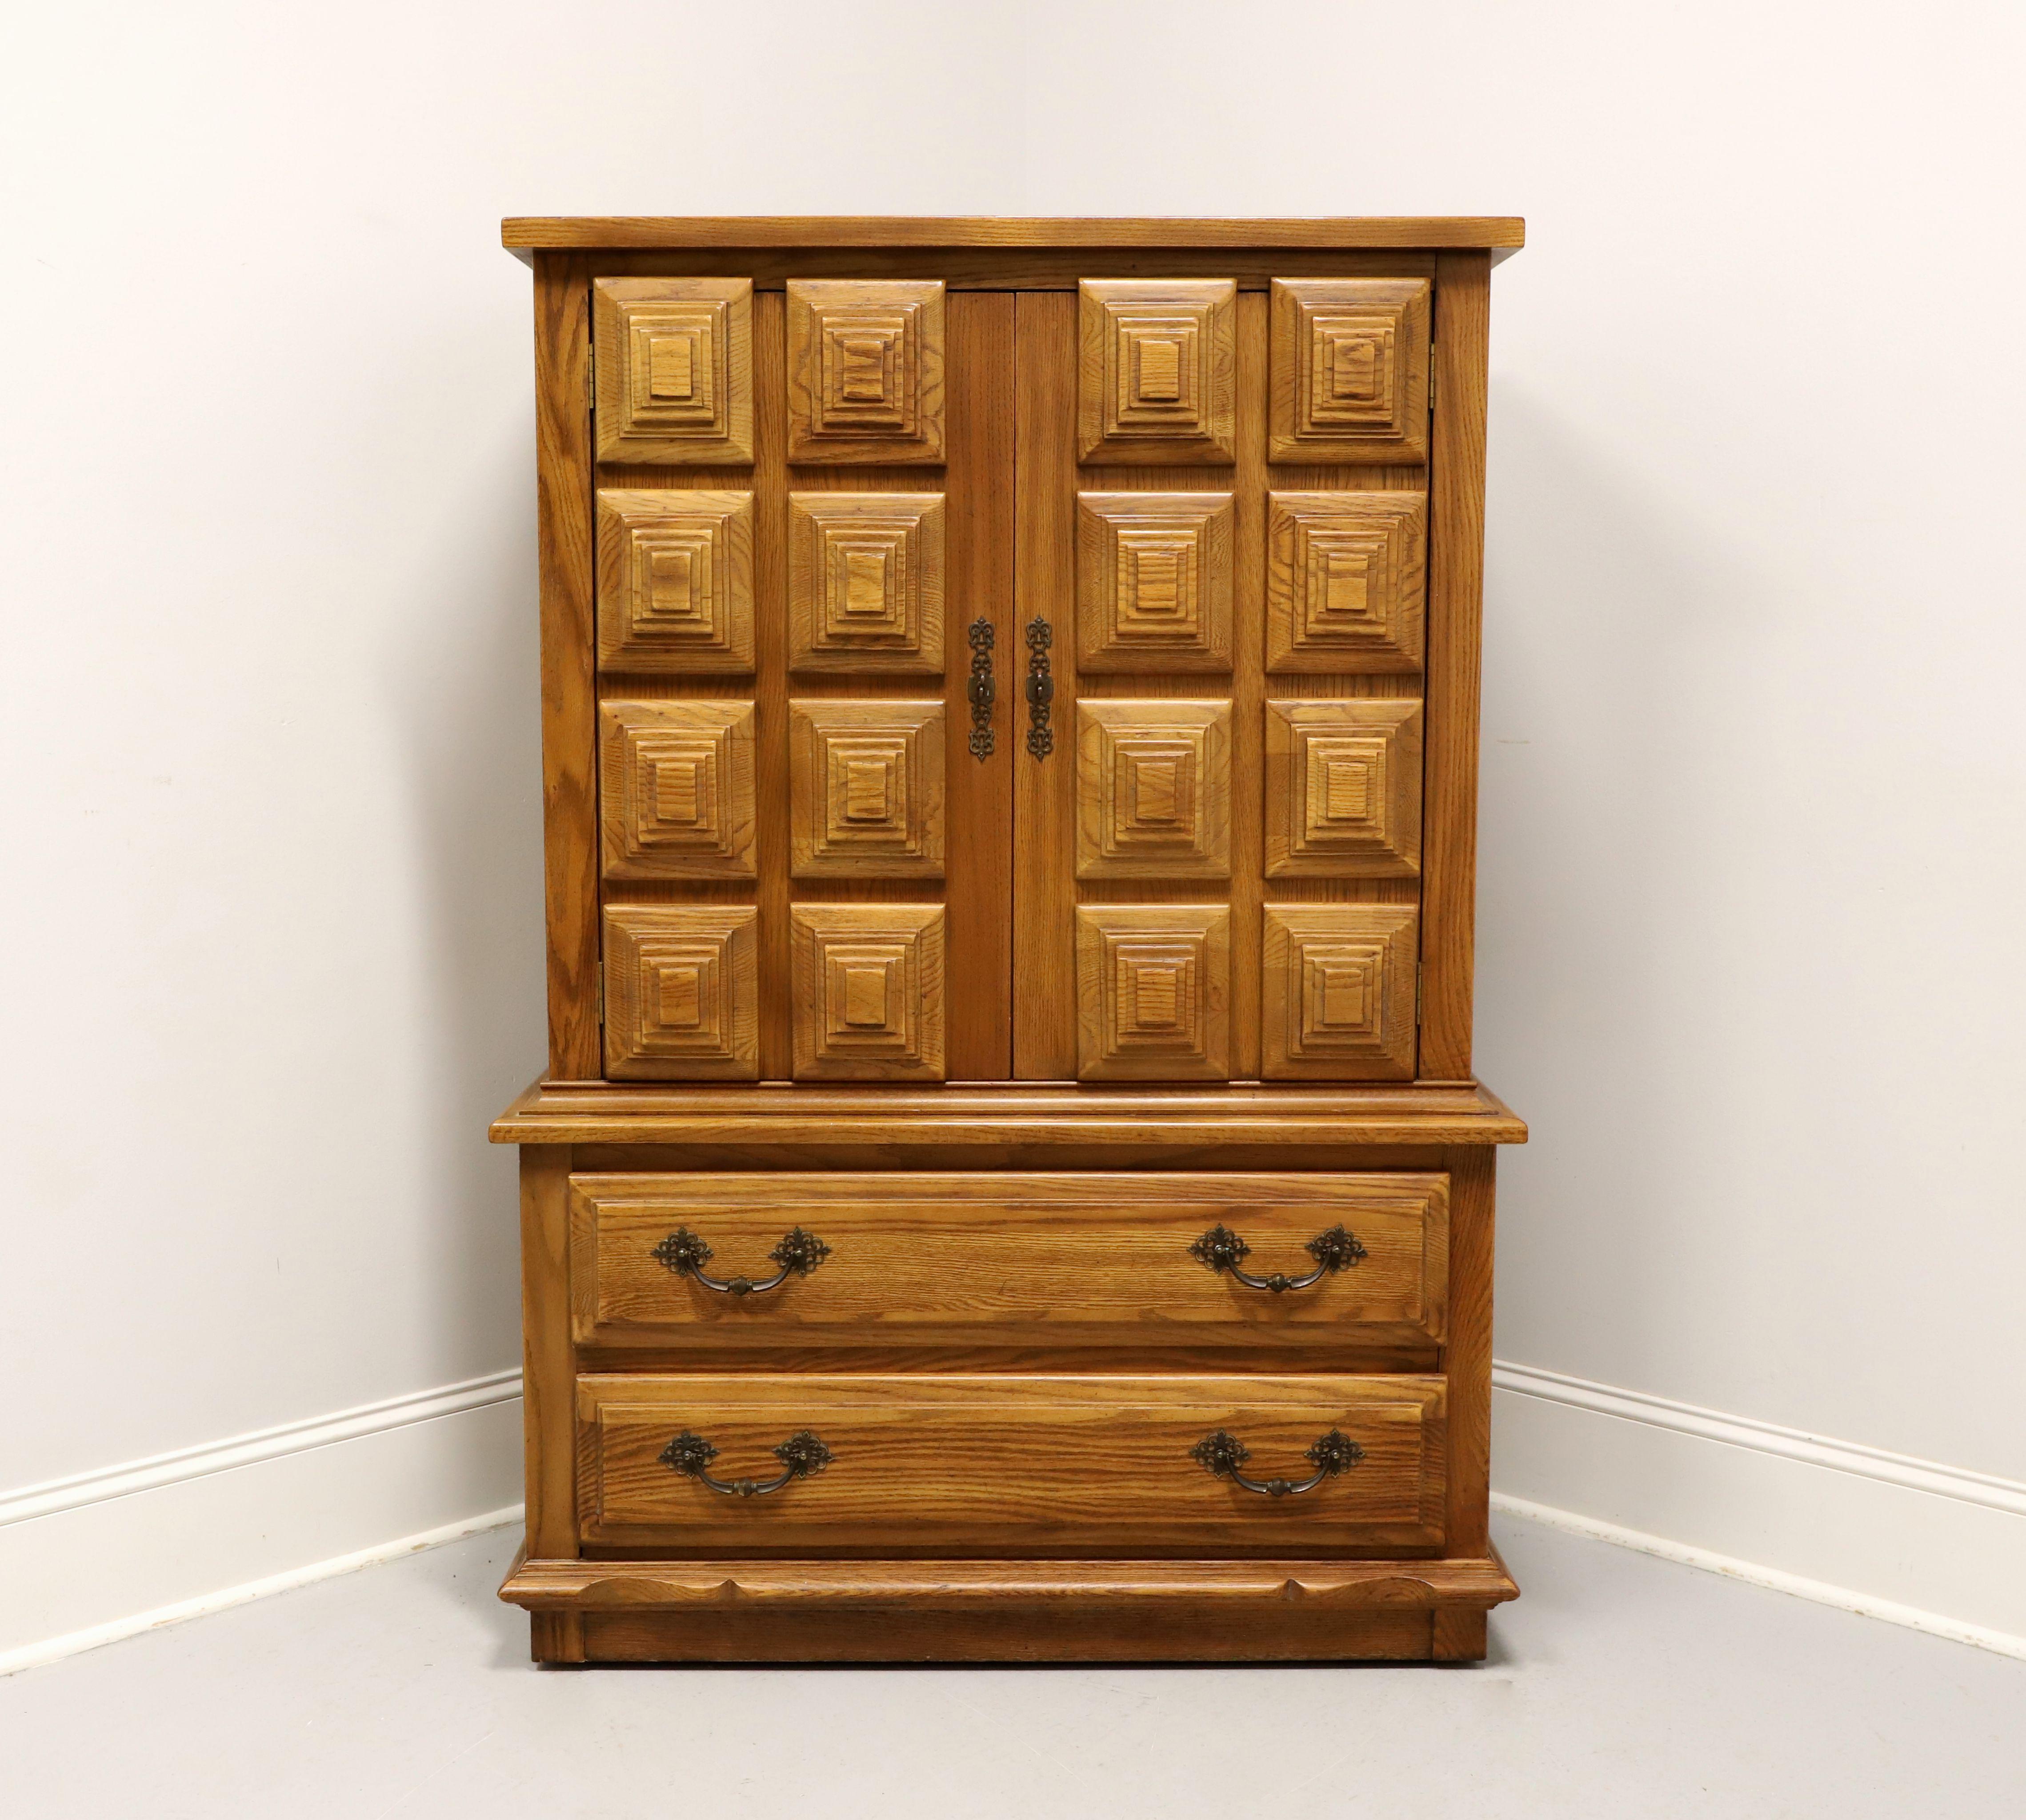 A Spanish Colonial style gentleman's chest by Link-Taylor, from their Espanol Collection. Solid oak with a lighter color slightly distressed finish, banded square edge top, brass hardware, raised & carved door fronts, and a decoratively carved solid